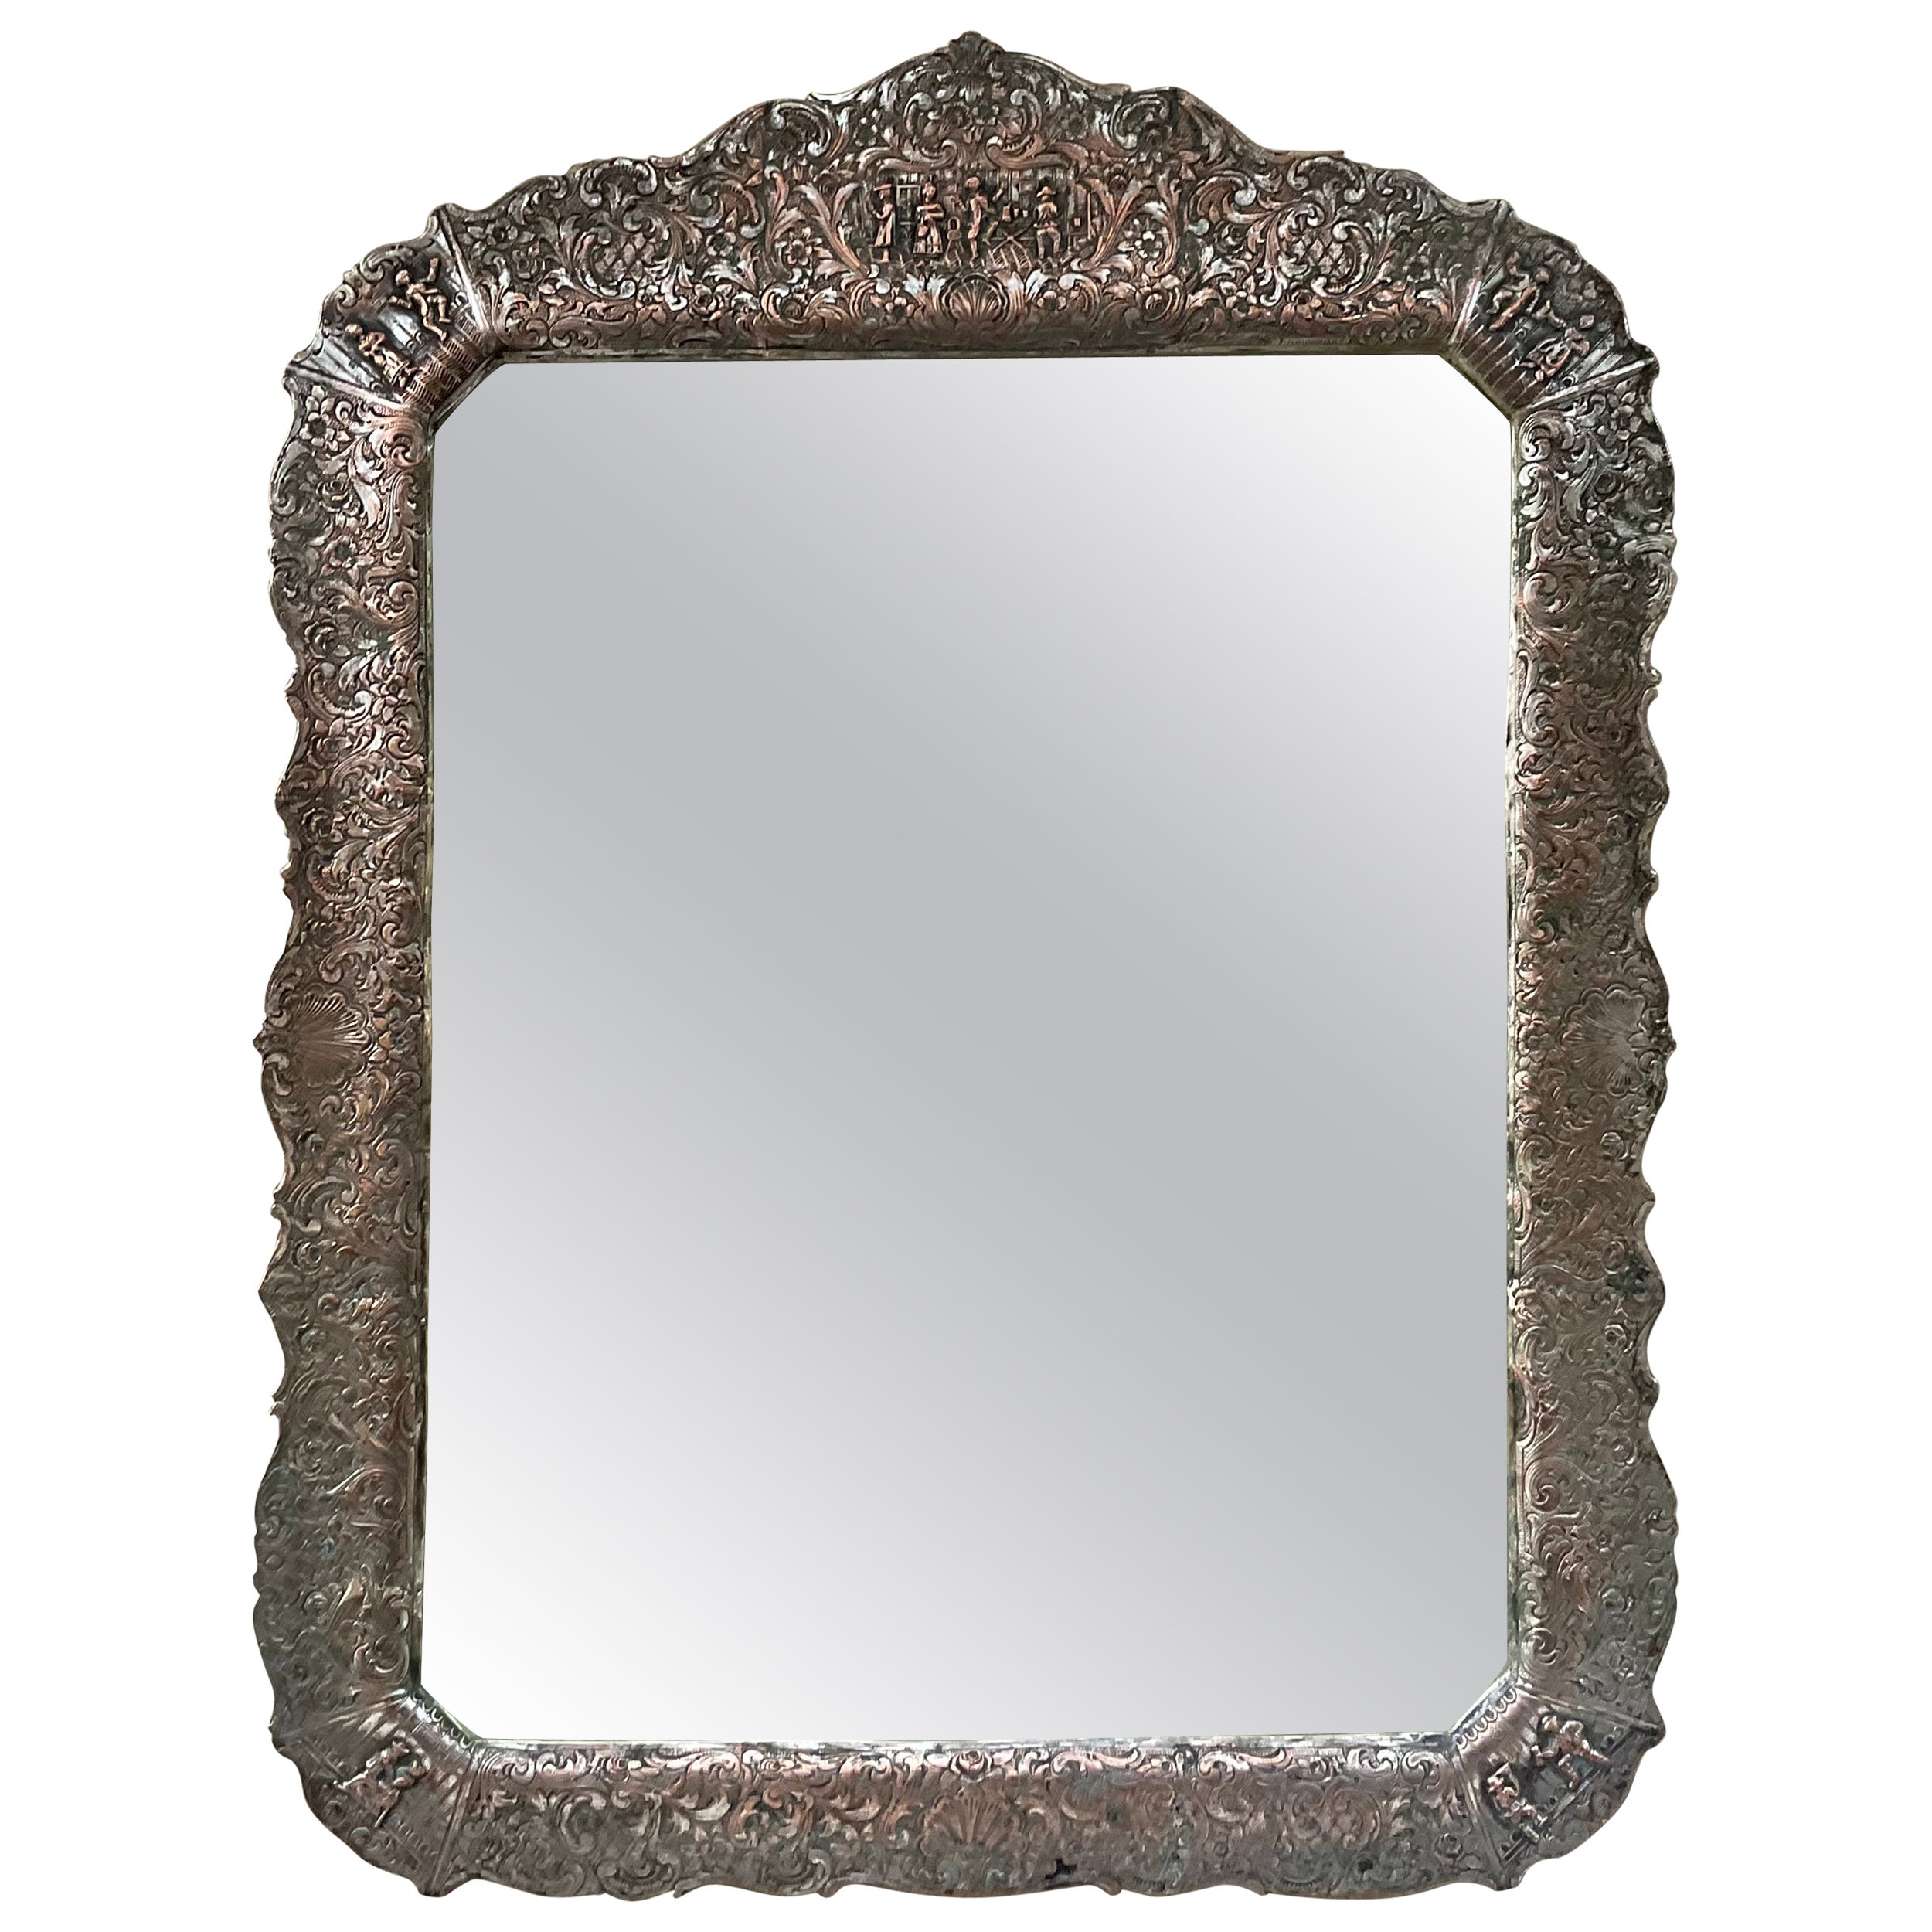 Antique Silver Plated Mirror 